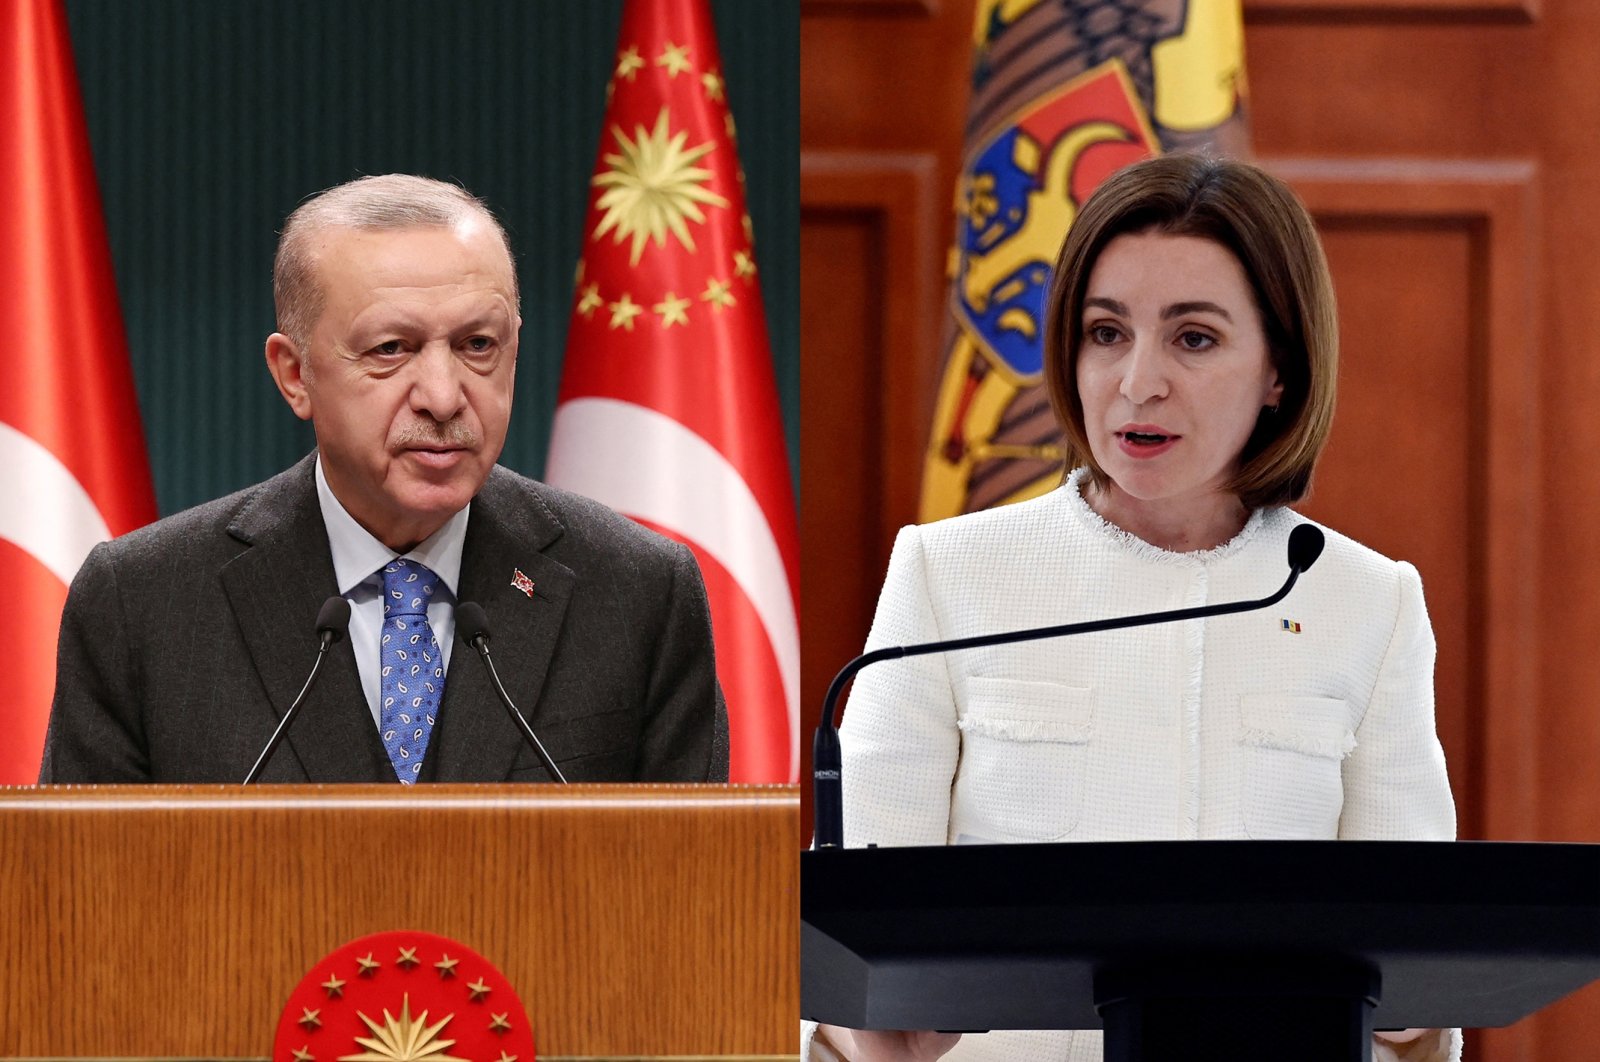 This photo combination shows President Recep Tayyip Erdoğan (L) speaking following a cabinet meeting in Ankara, Turkey on Feb. 28, 2022, and his Moldovan counterpart Maia Sandu speaking during a news conference with U.S. Secretary of State Antony Blinken (not pictured) at the Presidential Palace in Chisinau, Moldova, March 6, 2022. (Photos by Reuters)